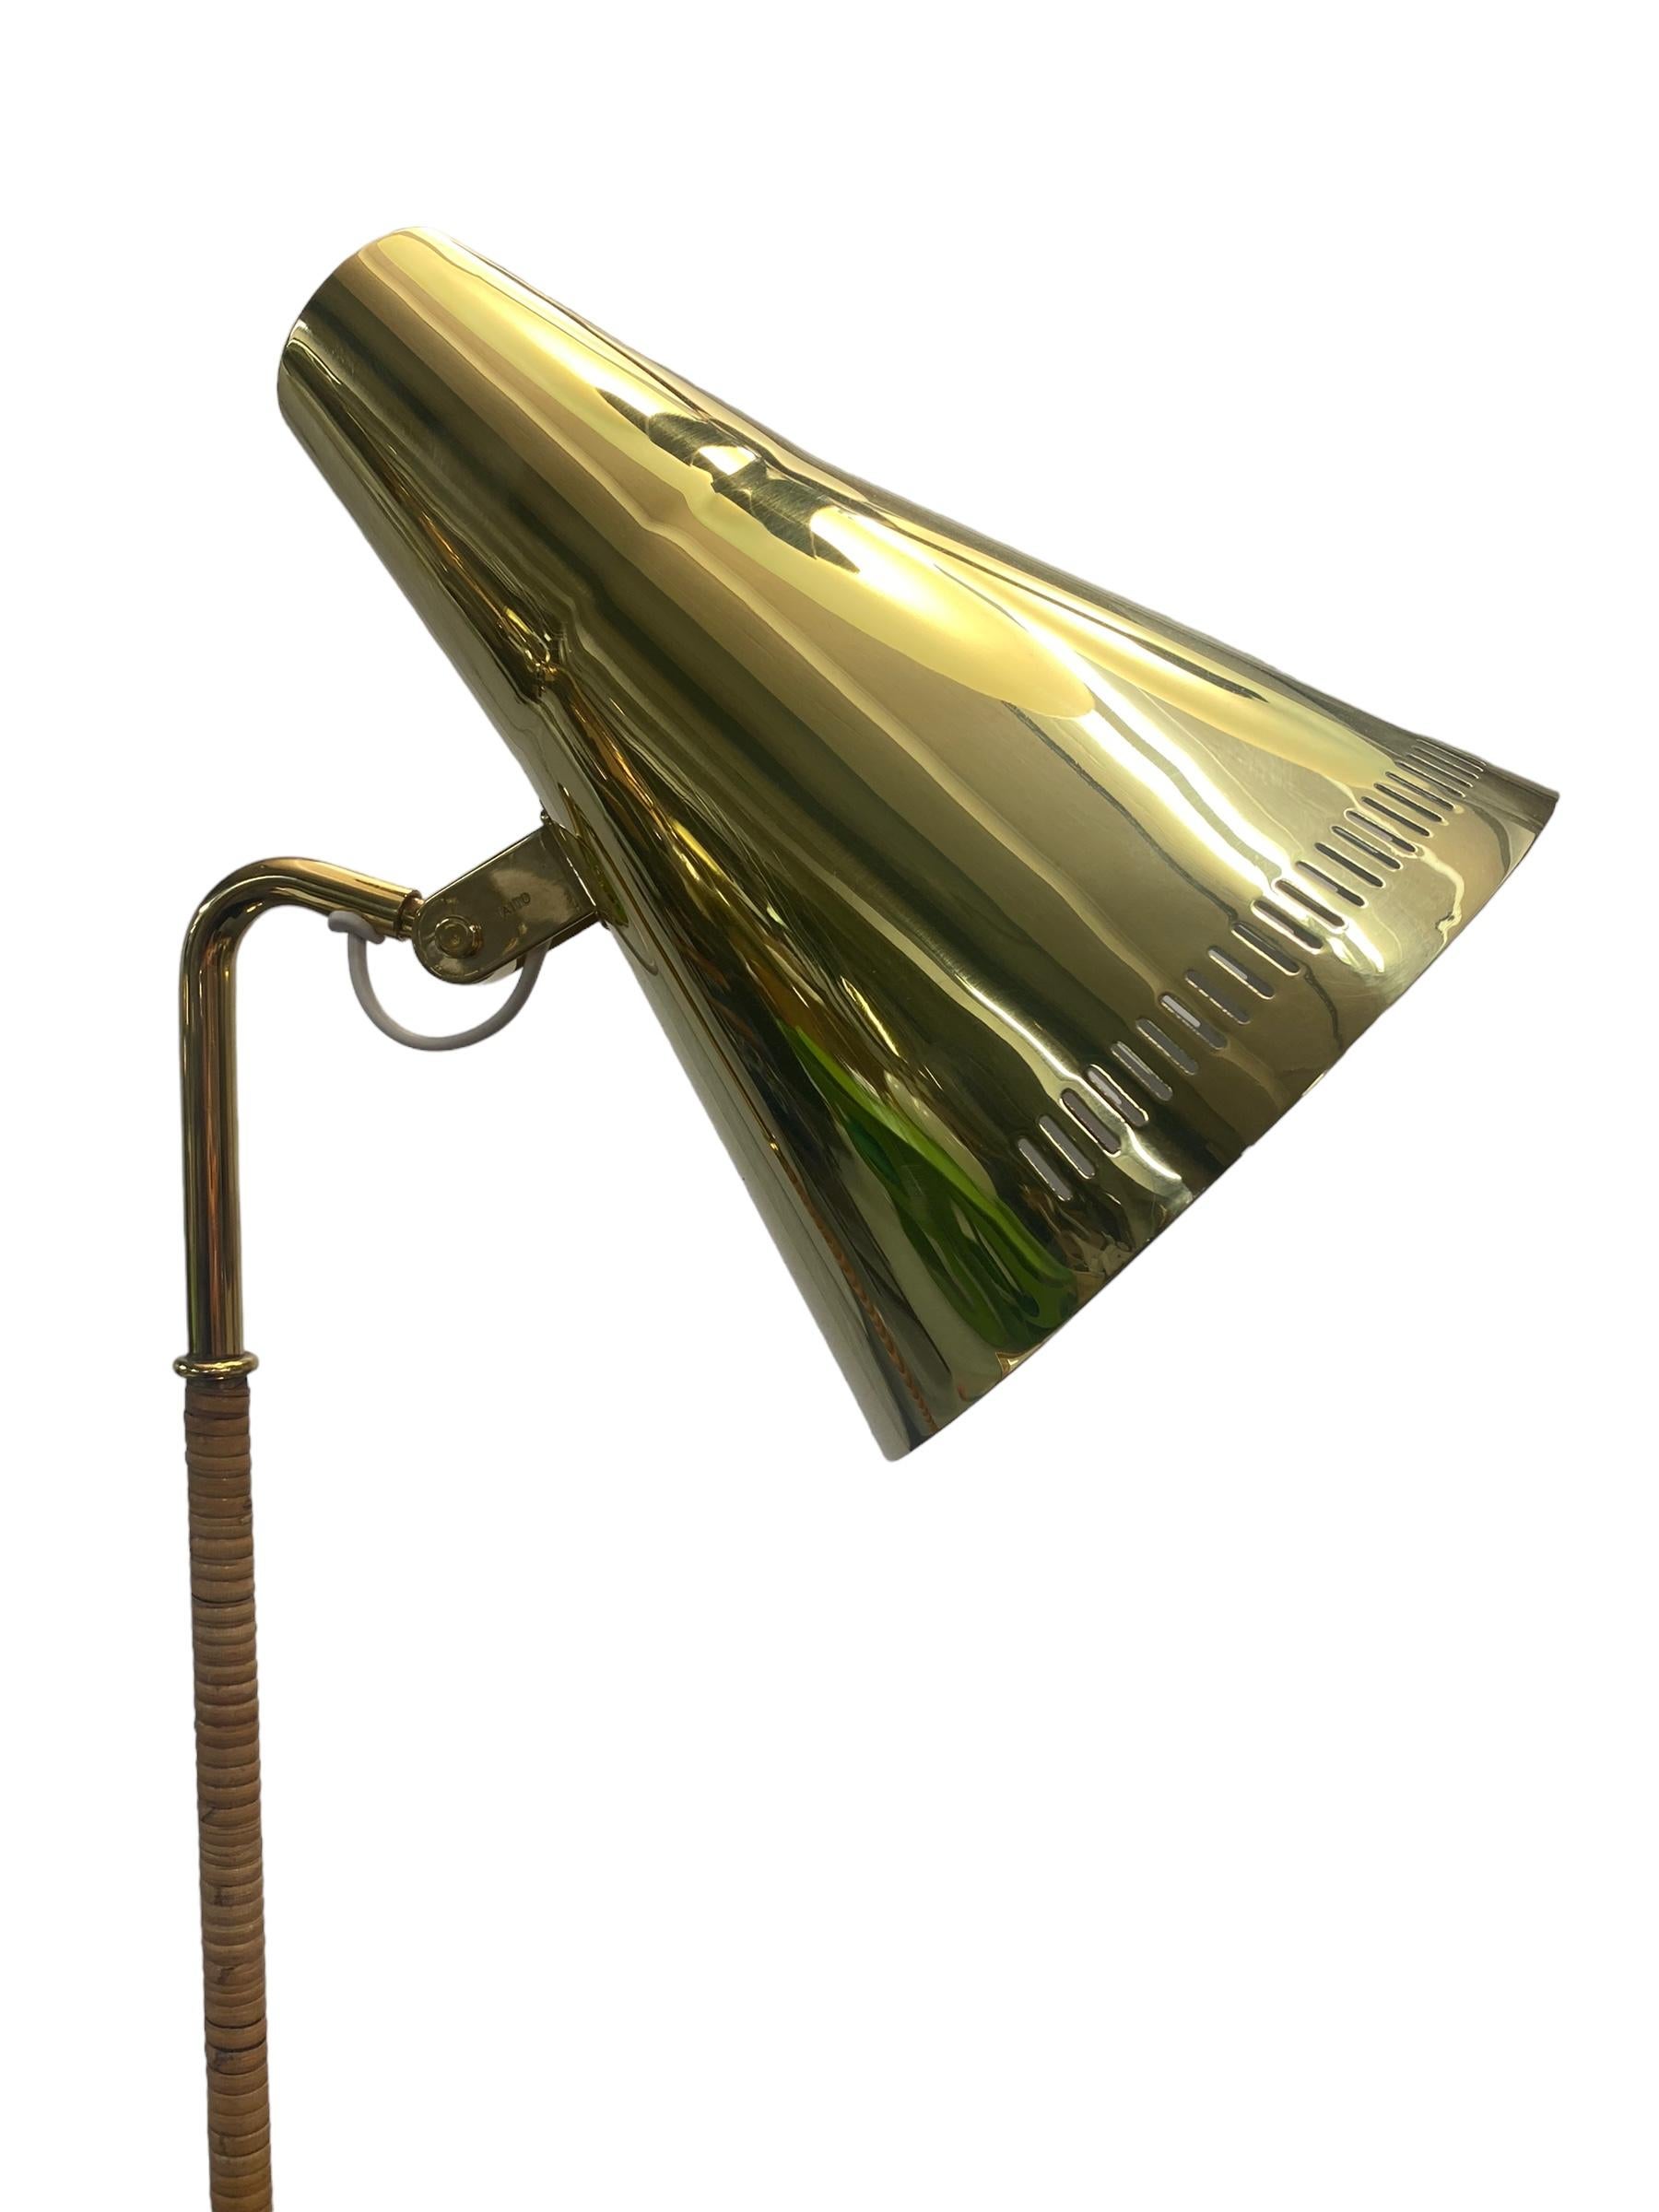 A gracefully slim floor lamp with a solid brass shade and a rattan wrapped stem. This lamp harmoniously combines the coldness of brass and natural warmth of rattan to create a design that can enhance the finest of interiors, private or public.

We